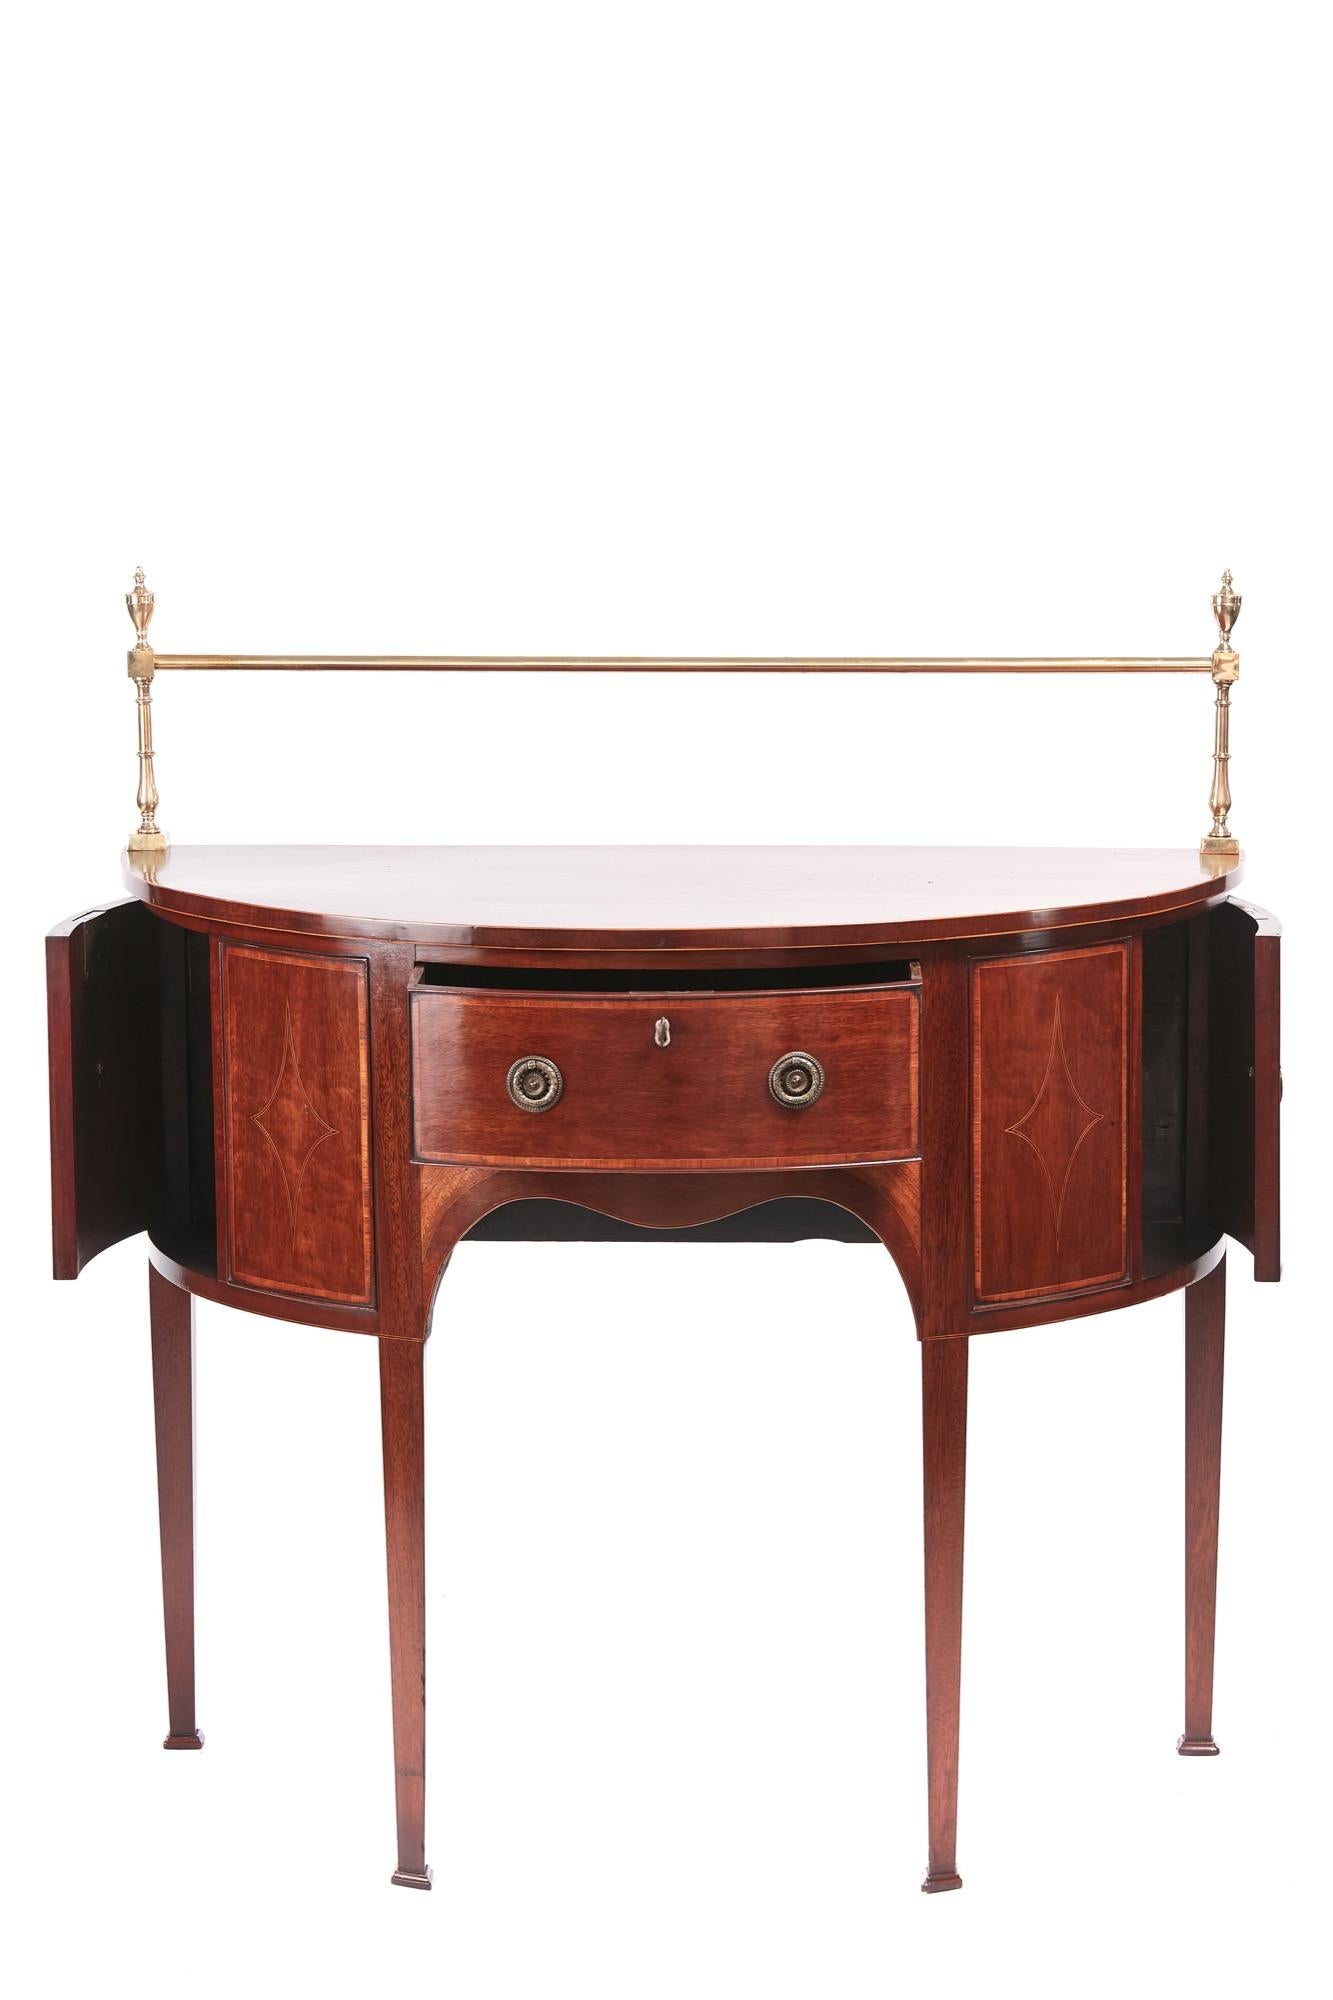 Fine George III small mahogany inlaid demilune sideboard, having a lovely mahogany top inlaid with satinwood and original brass rail, one frieze drawer with original brass handles, two end cupboard doors inlaid with satinwood and original brass